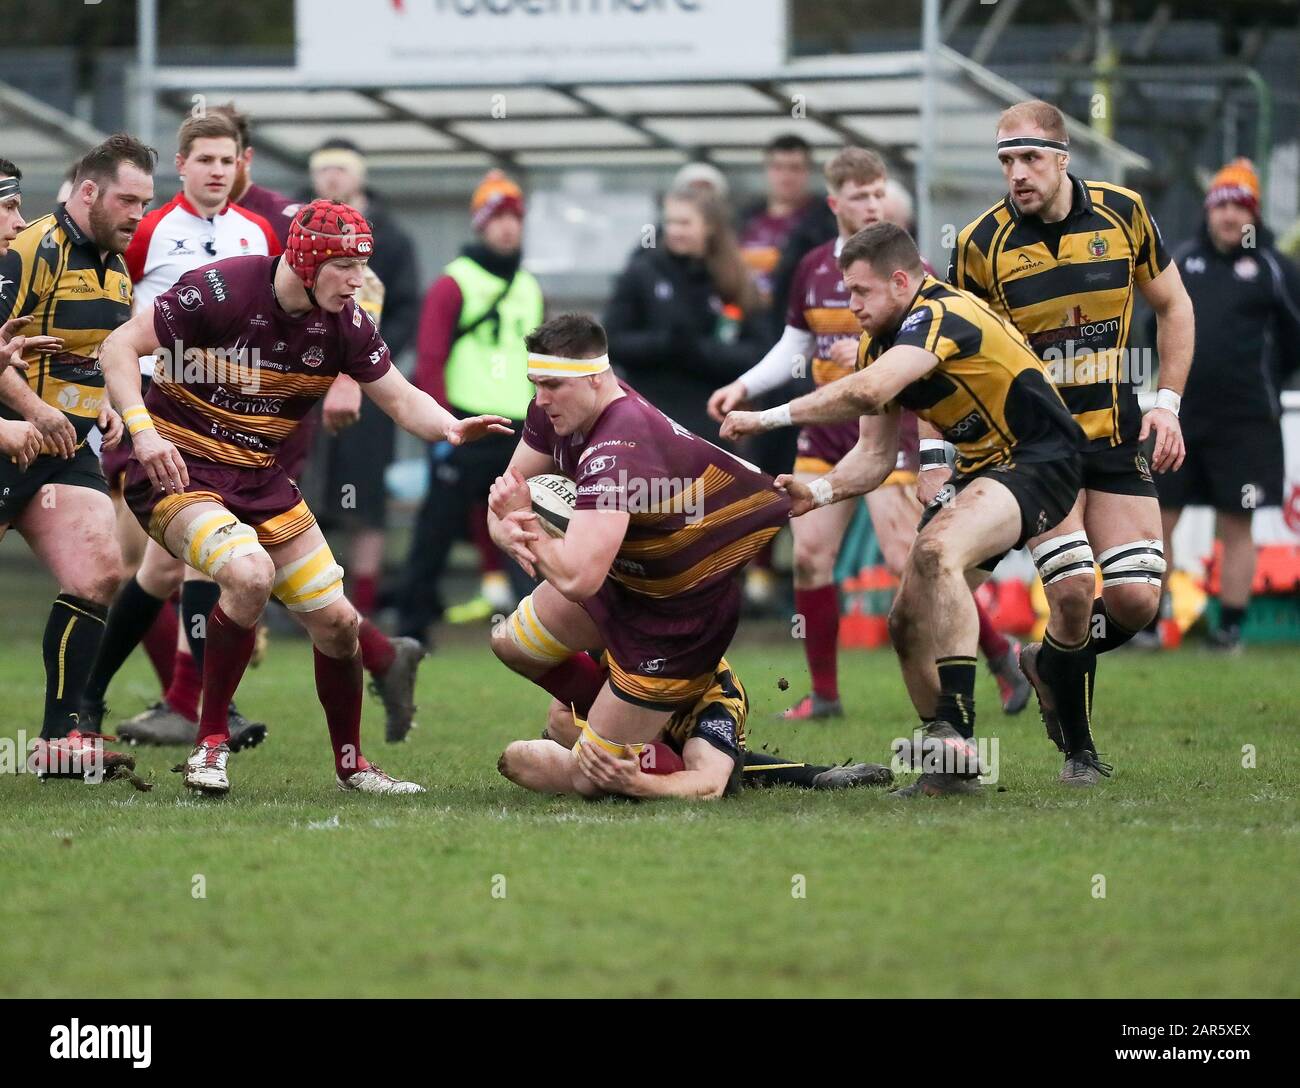 25.01.2020, Hinckley, Leicester, England. Rugby Union, Hinckley rfc v Sedgley Park rfc.   Bob Birtwell on the charge Sedgley Park during the RFU National League 2 North (NL2N) game played at the Leicester  Road Stadium. Stock Photo